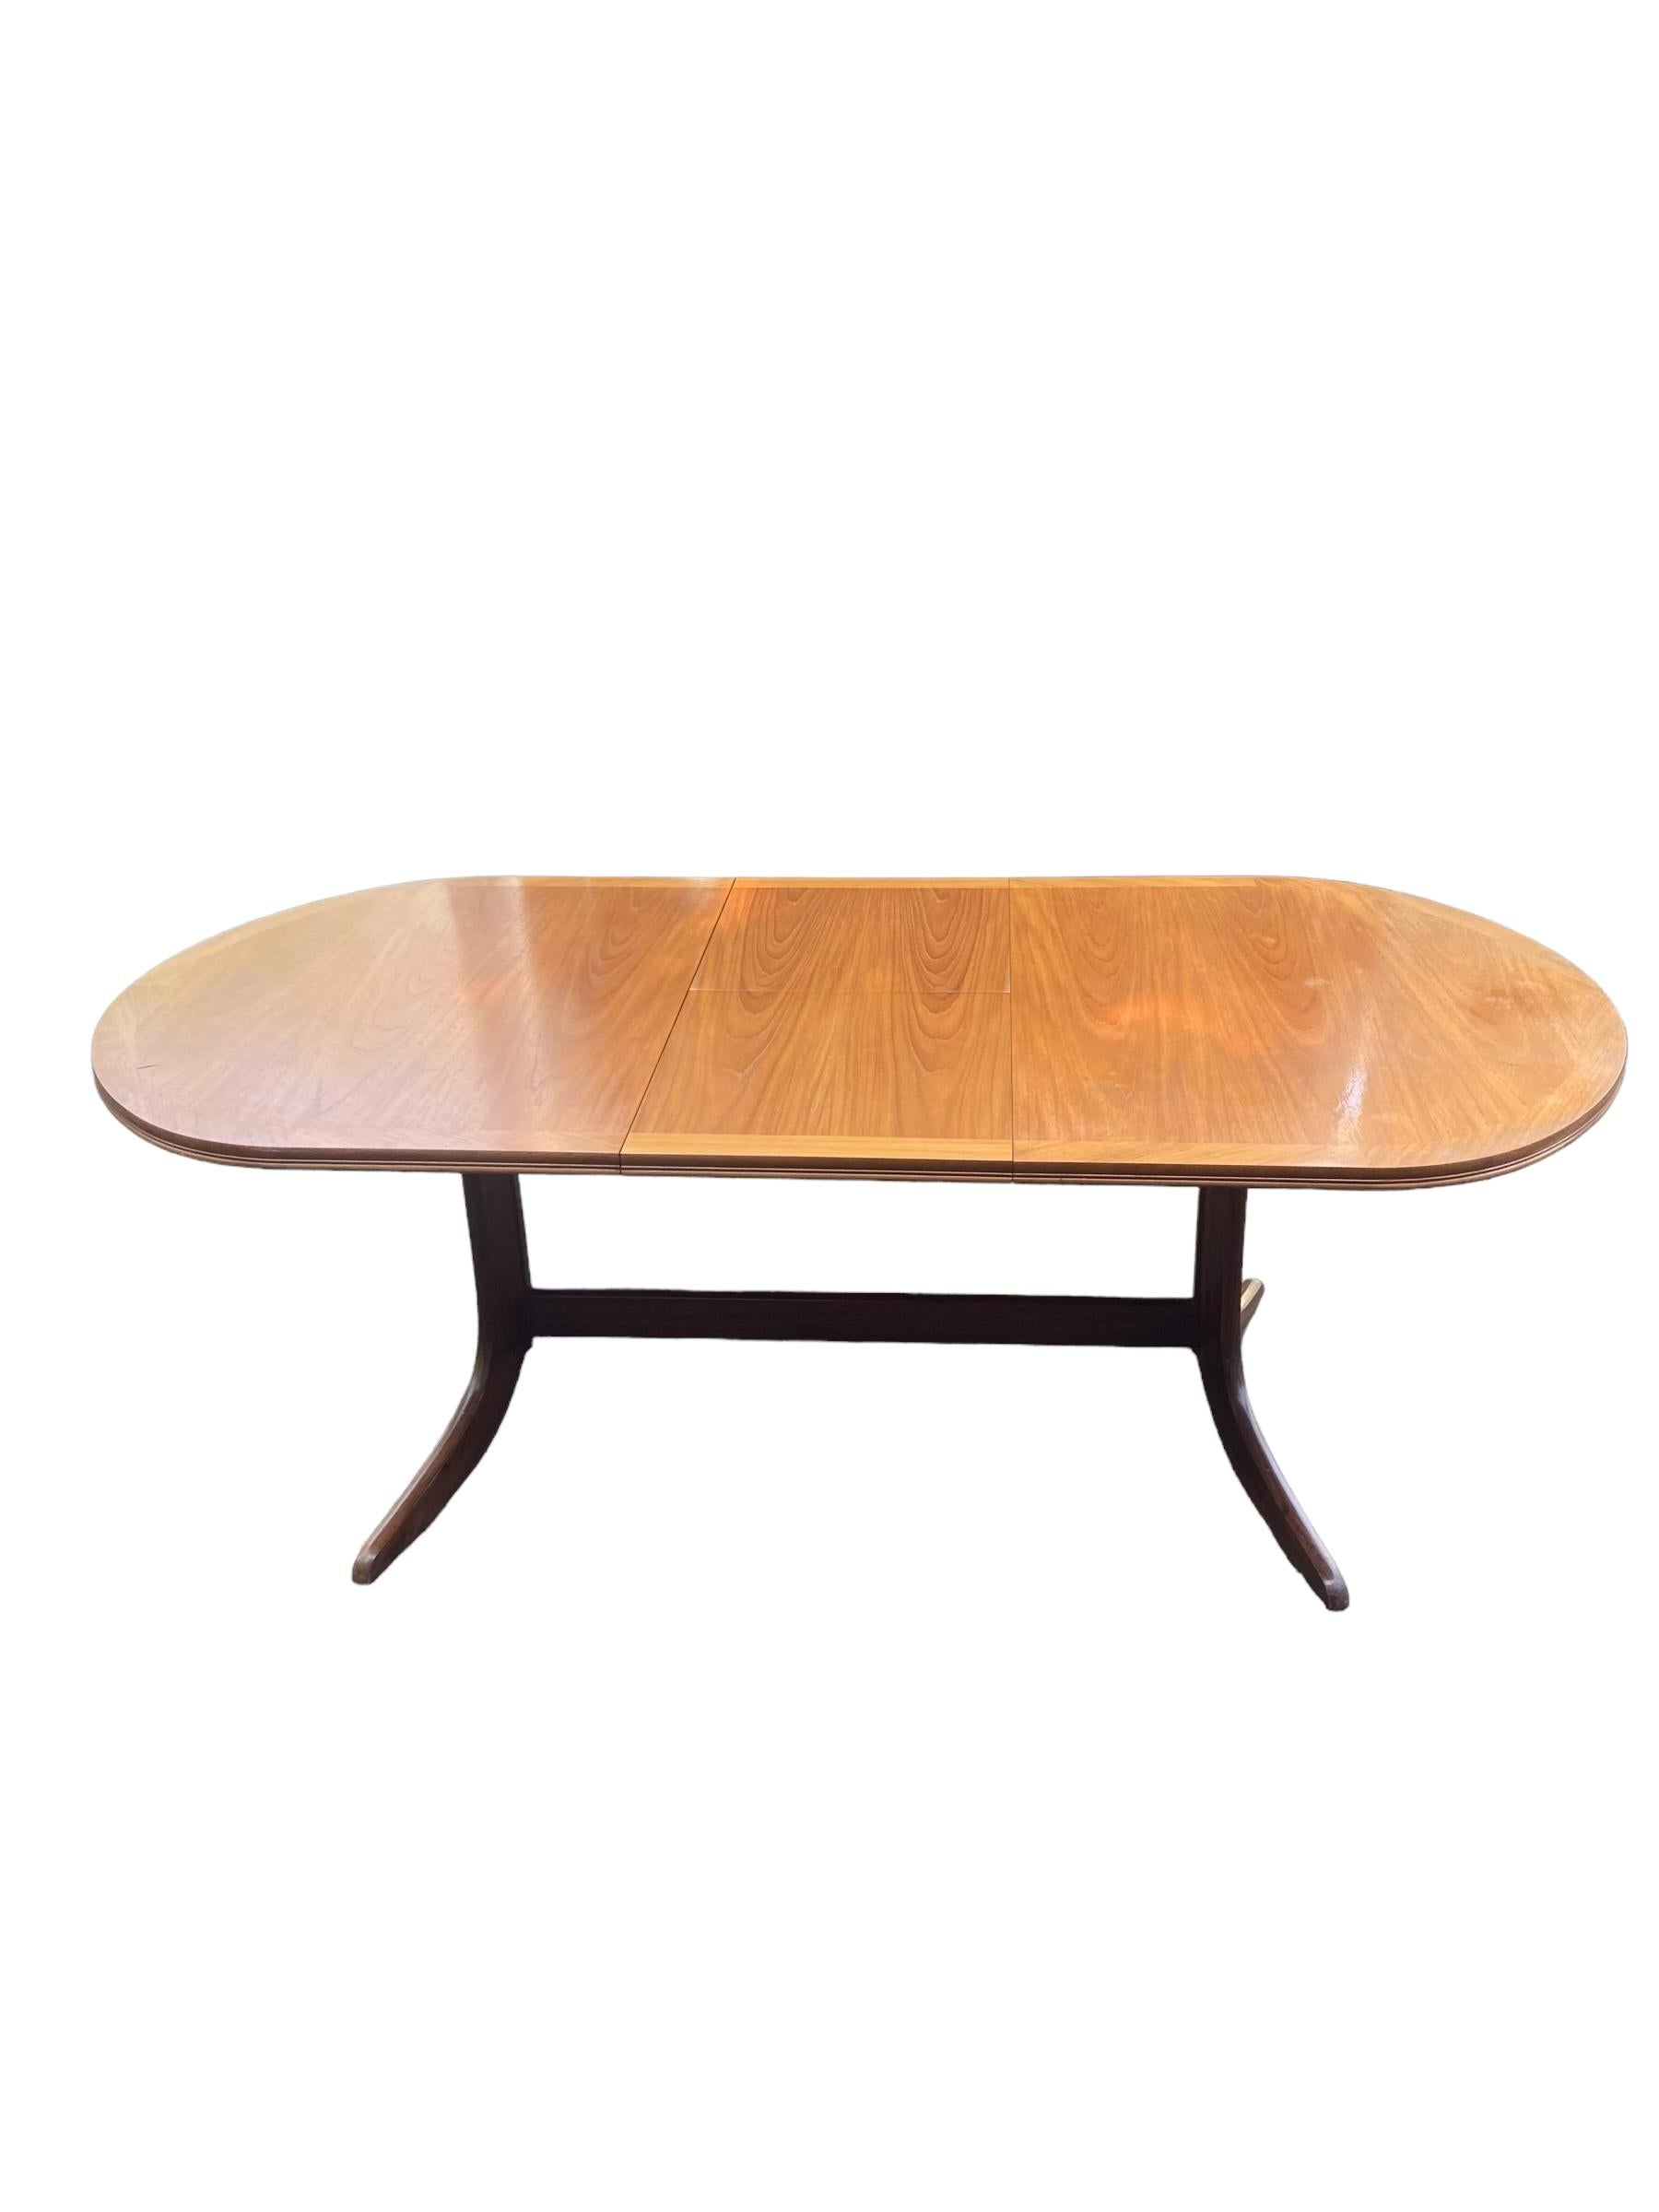 20th Century Nathan Extendable Teak Mid Century Dining Table For Sale